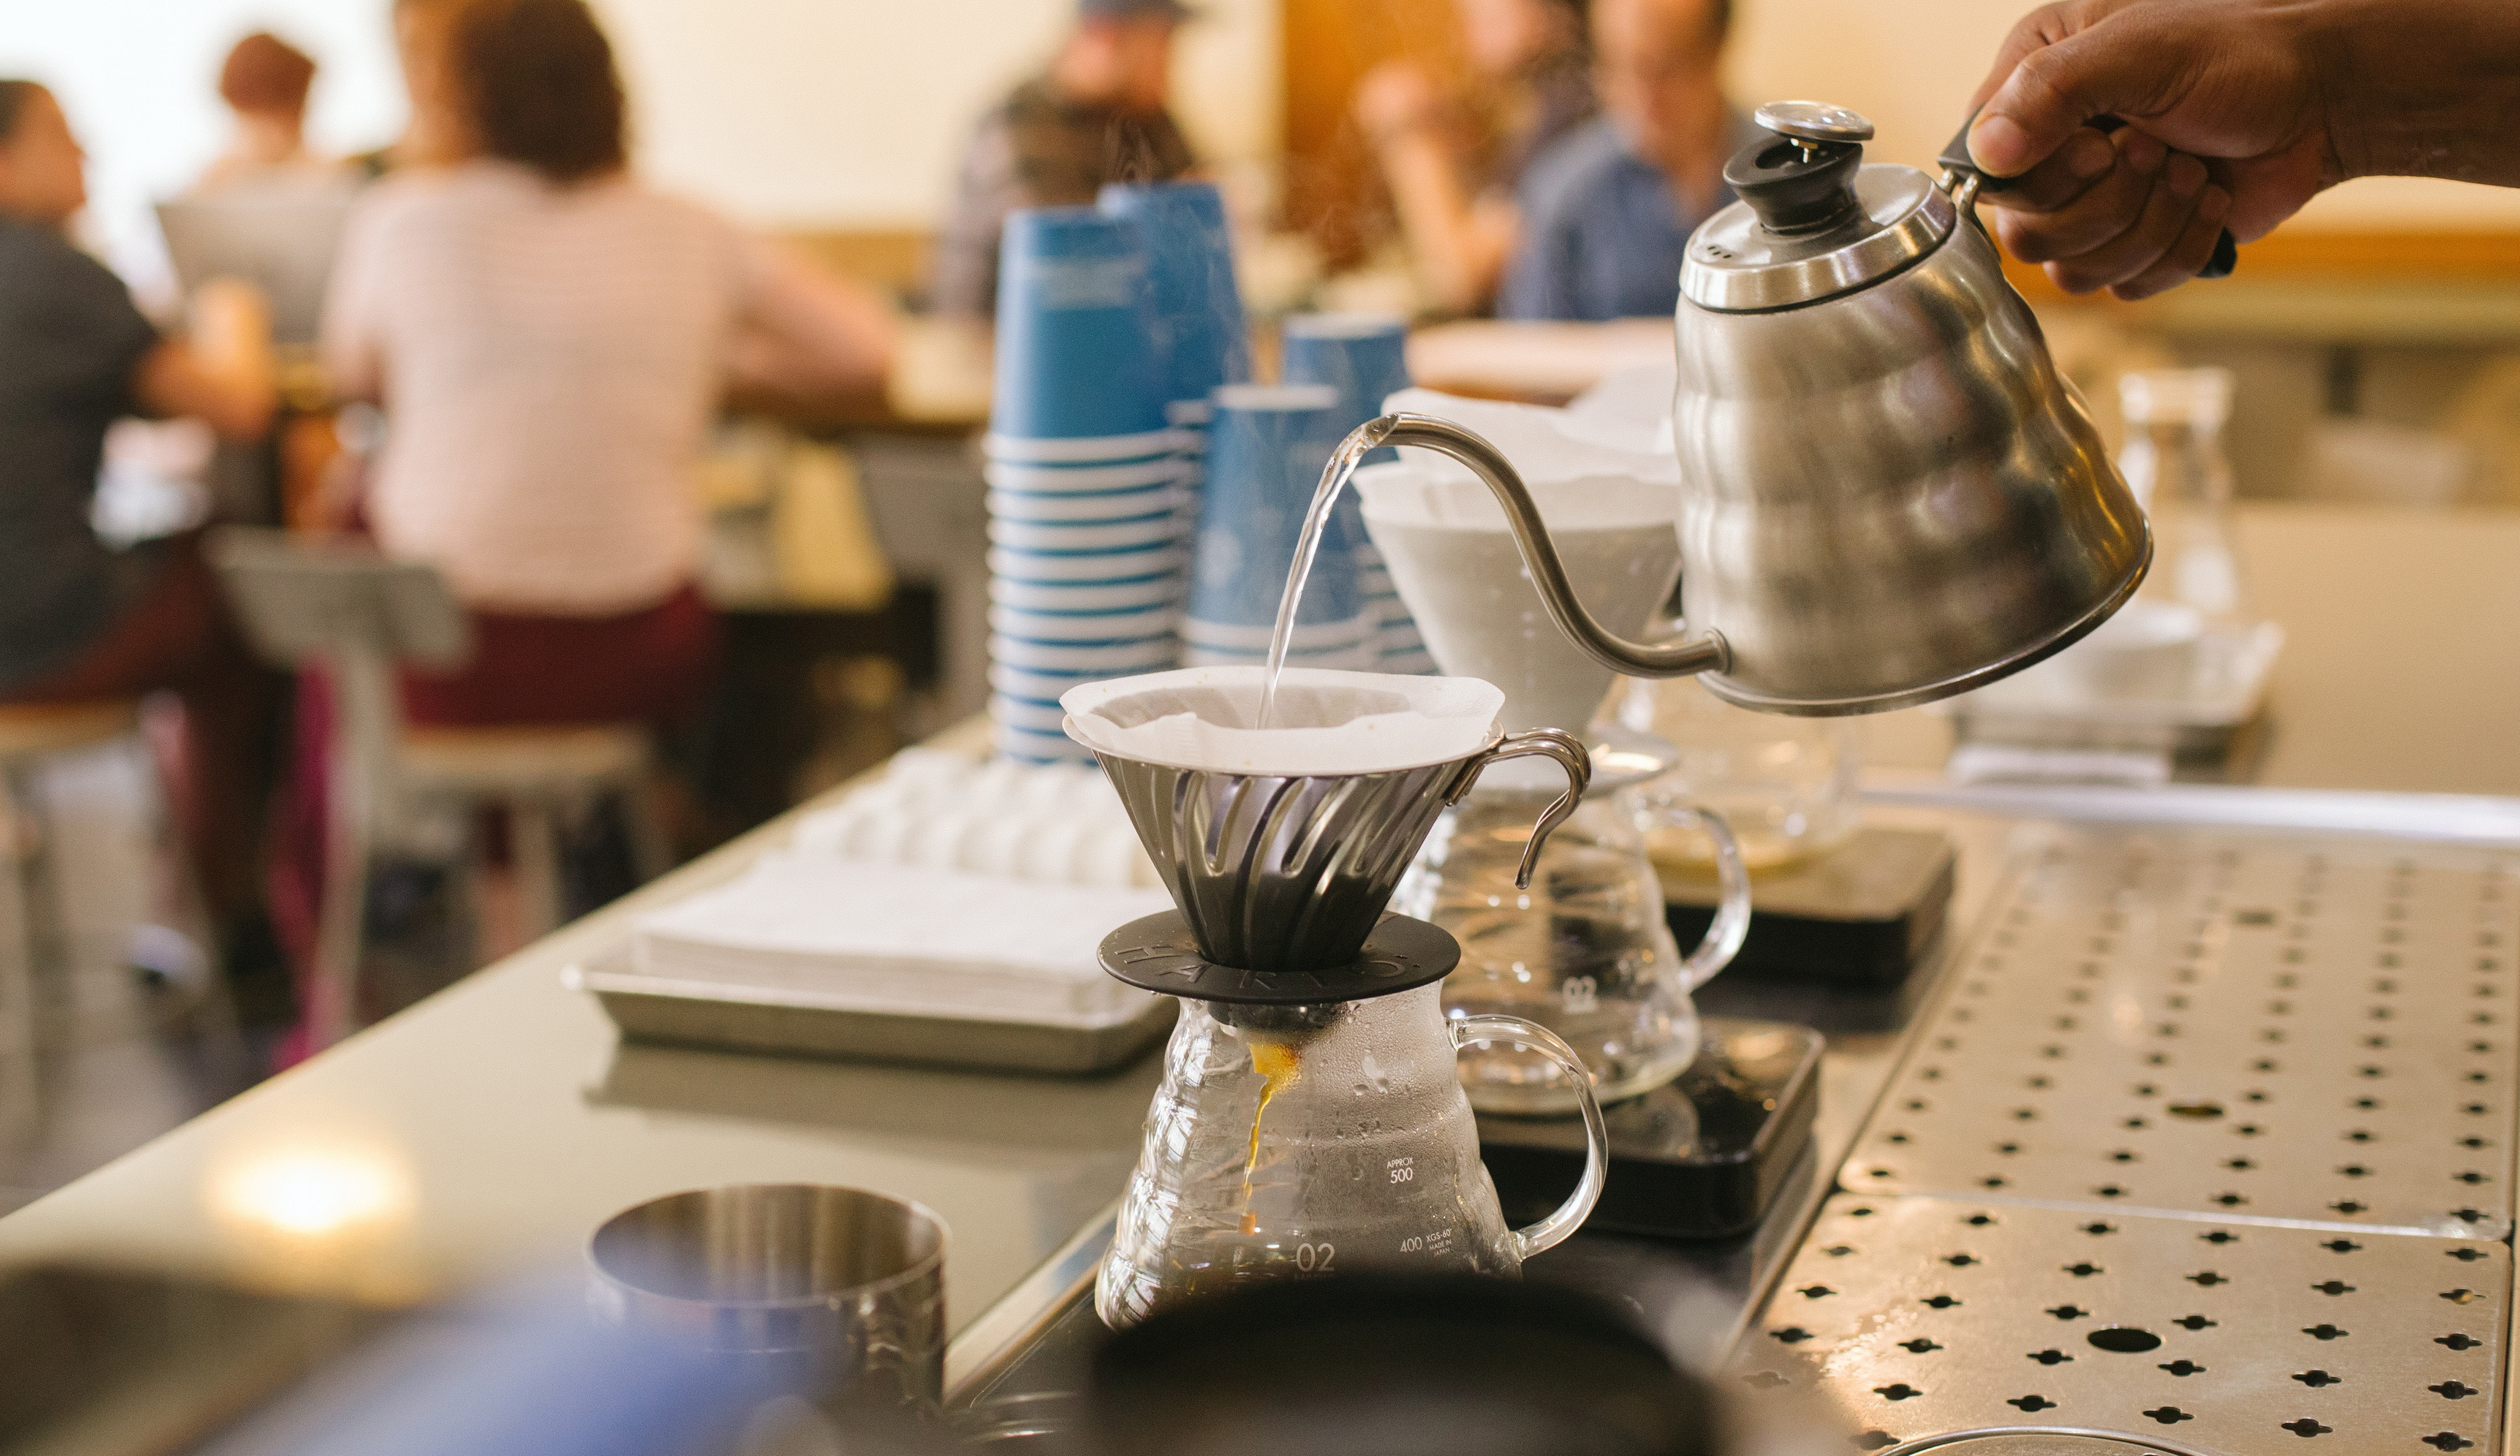 Follow this v60 brewing guide to make filtered coffee just like the baristas at Blueprint Coffee Delmar.